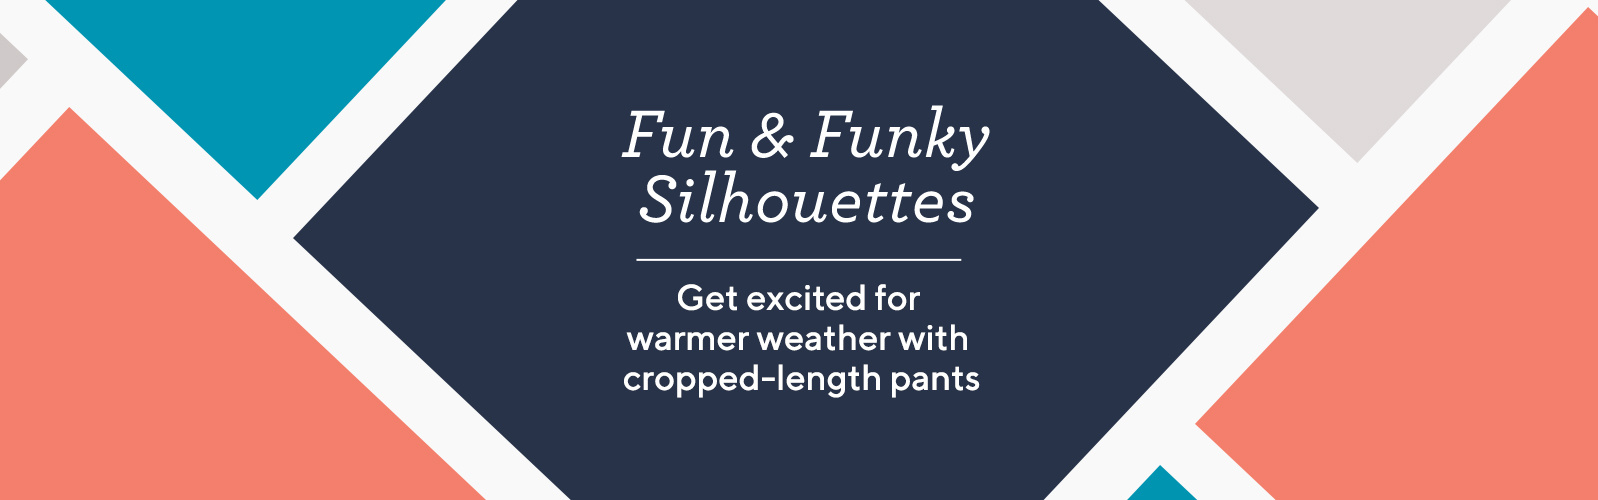 Get excited for warmer weather with cropped-length pants